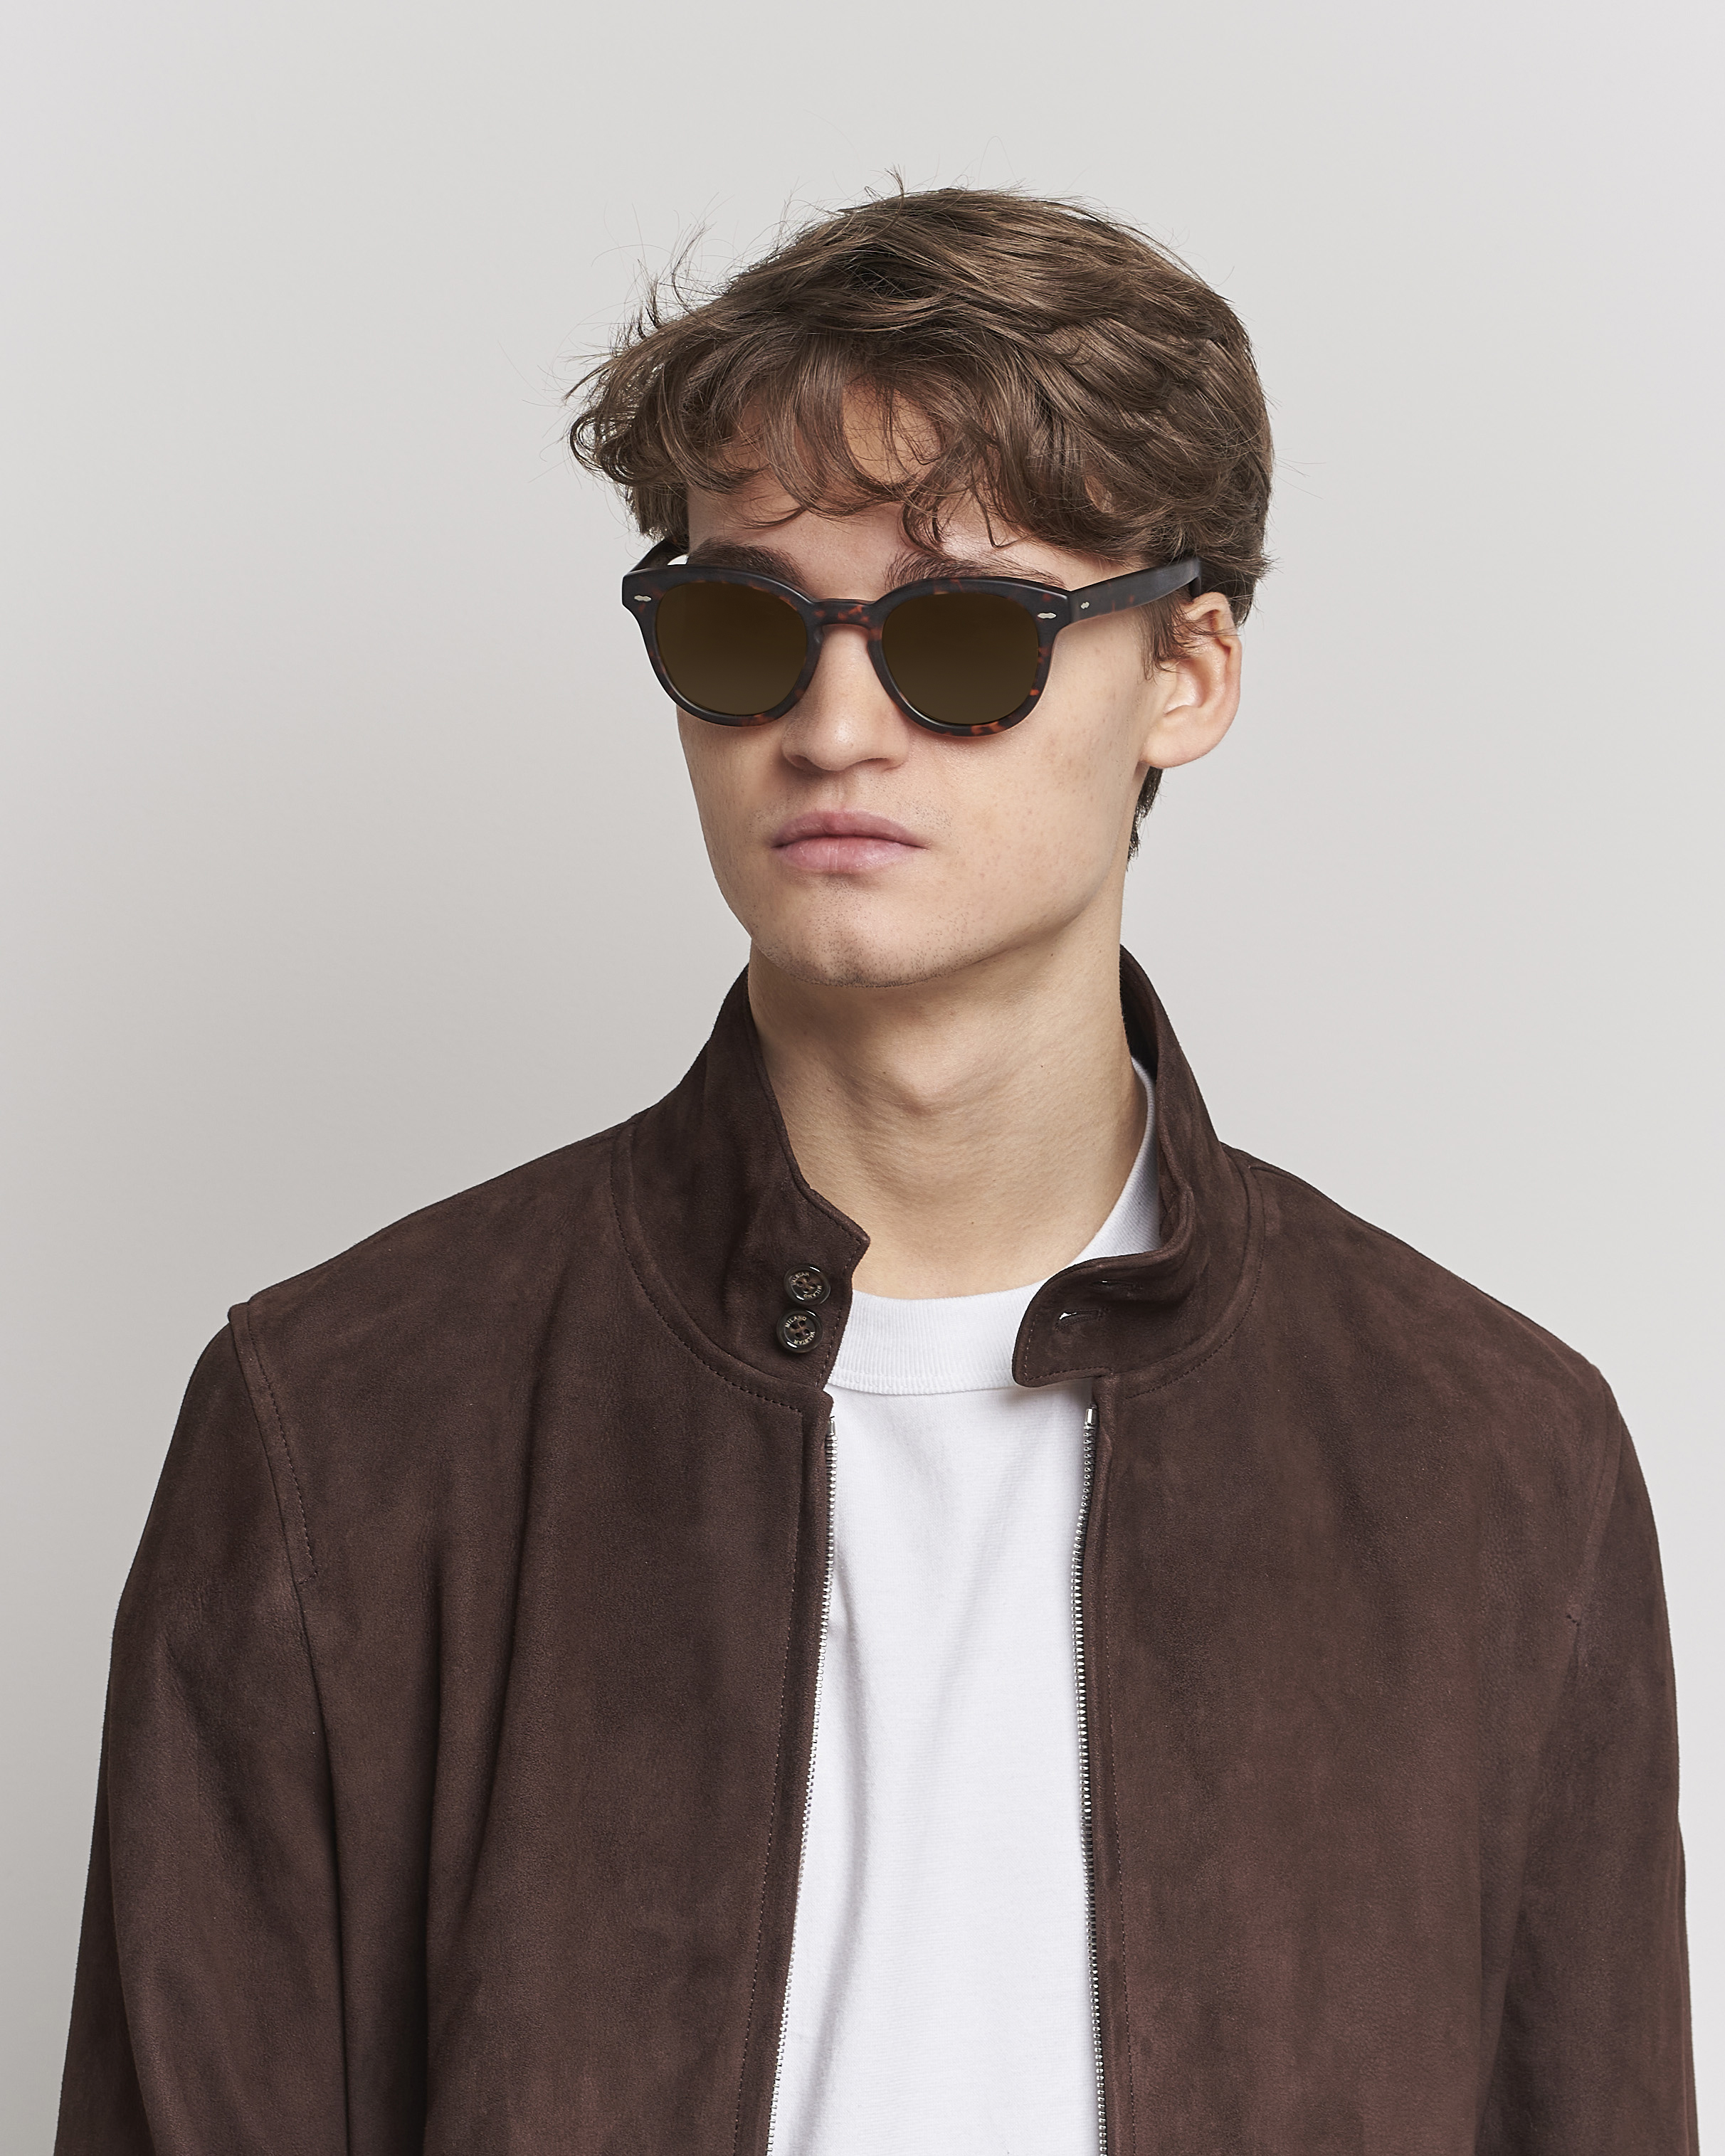 Herre | Oliver Peoples | Oliver Peoples | Cary Grant Sunglasses Semi Matte Tortoise